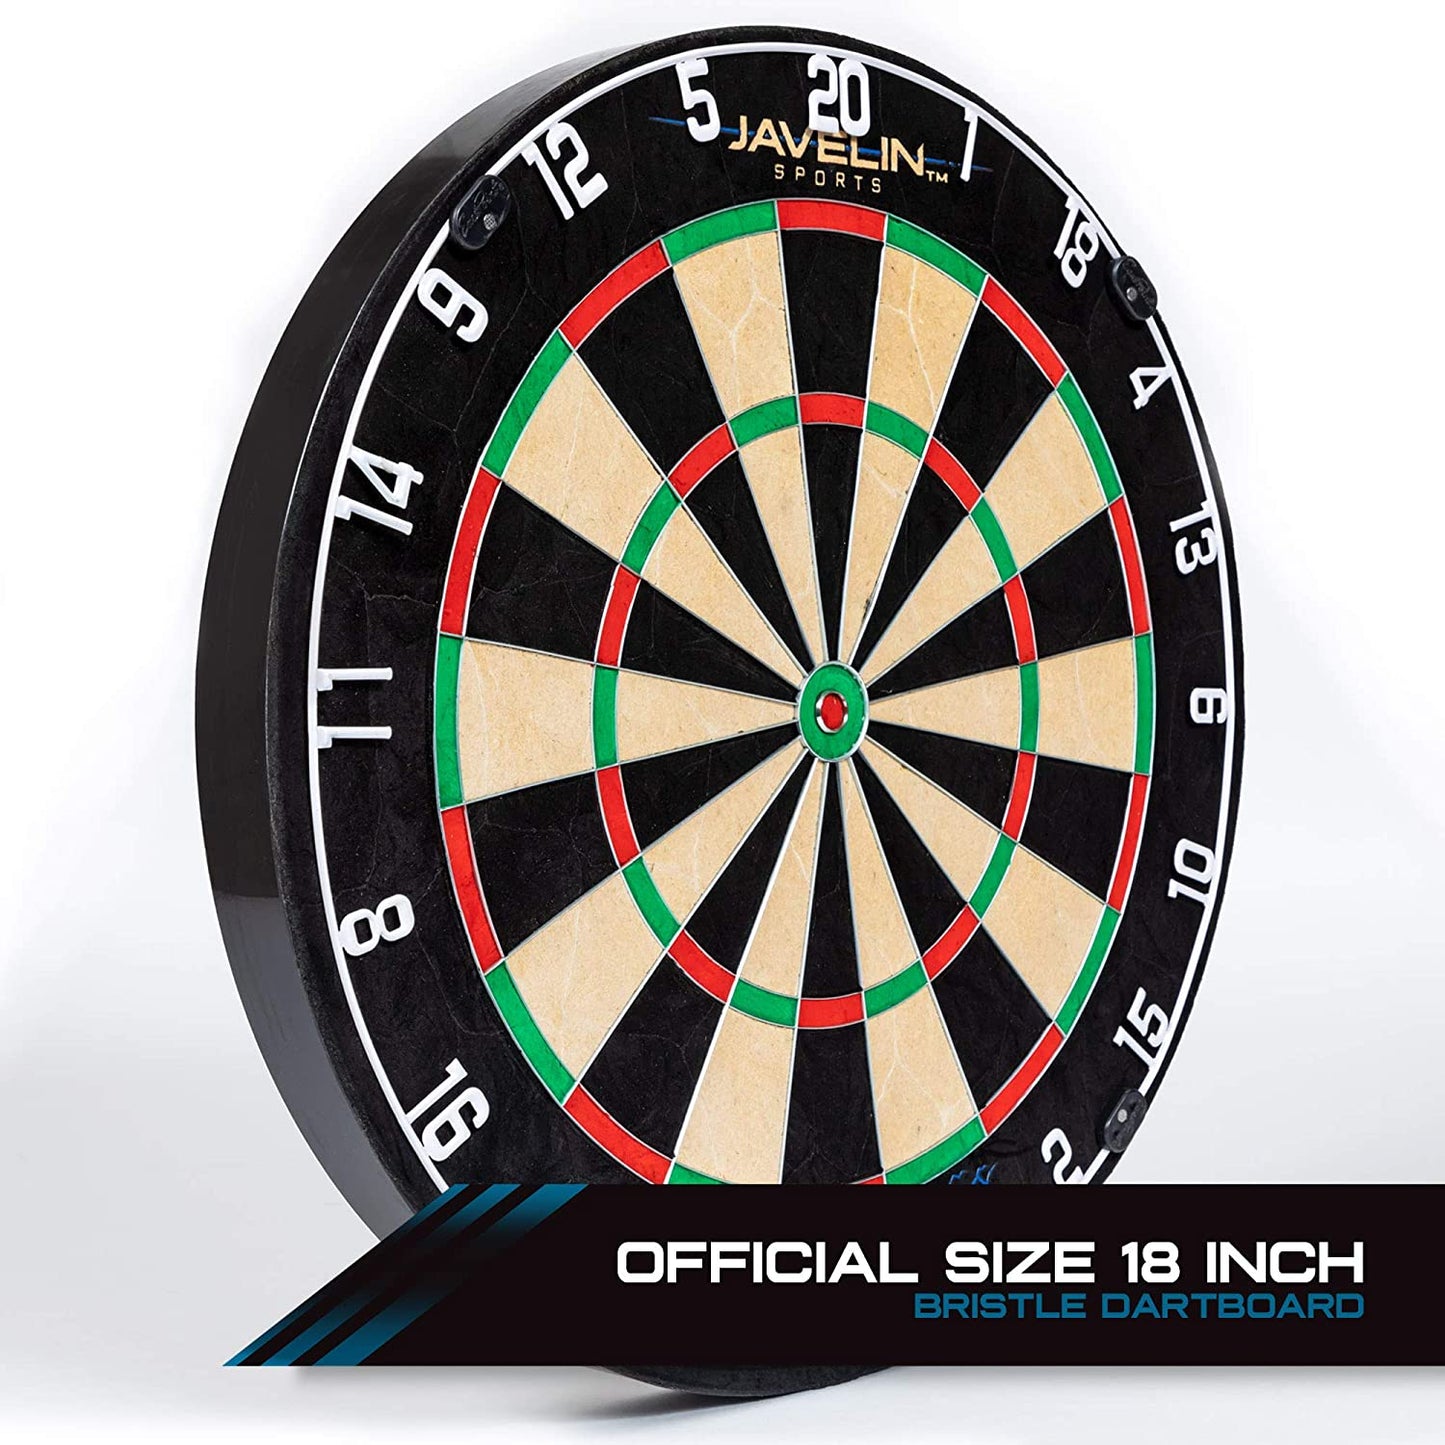 Volt Official Size Bristle Dartboard Set, Premium African Self-Healing Sisal Fibers, Easy-To-Mount Board- Perfect for Family Game Room, Basements, Bar, Man Cave, or Garage